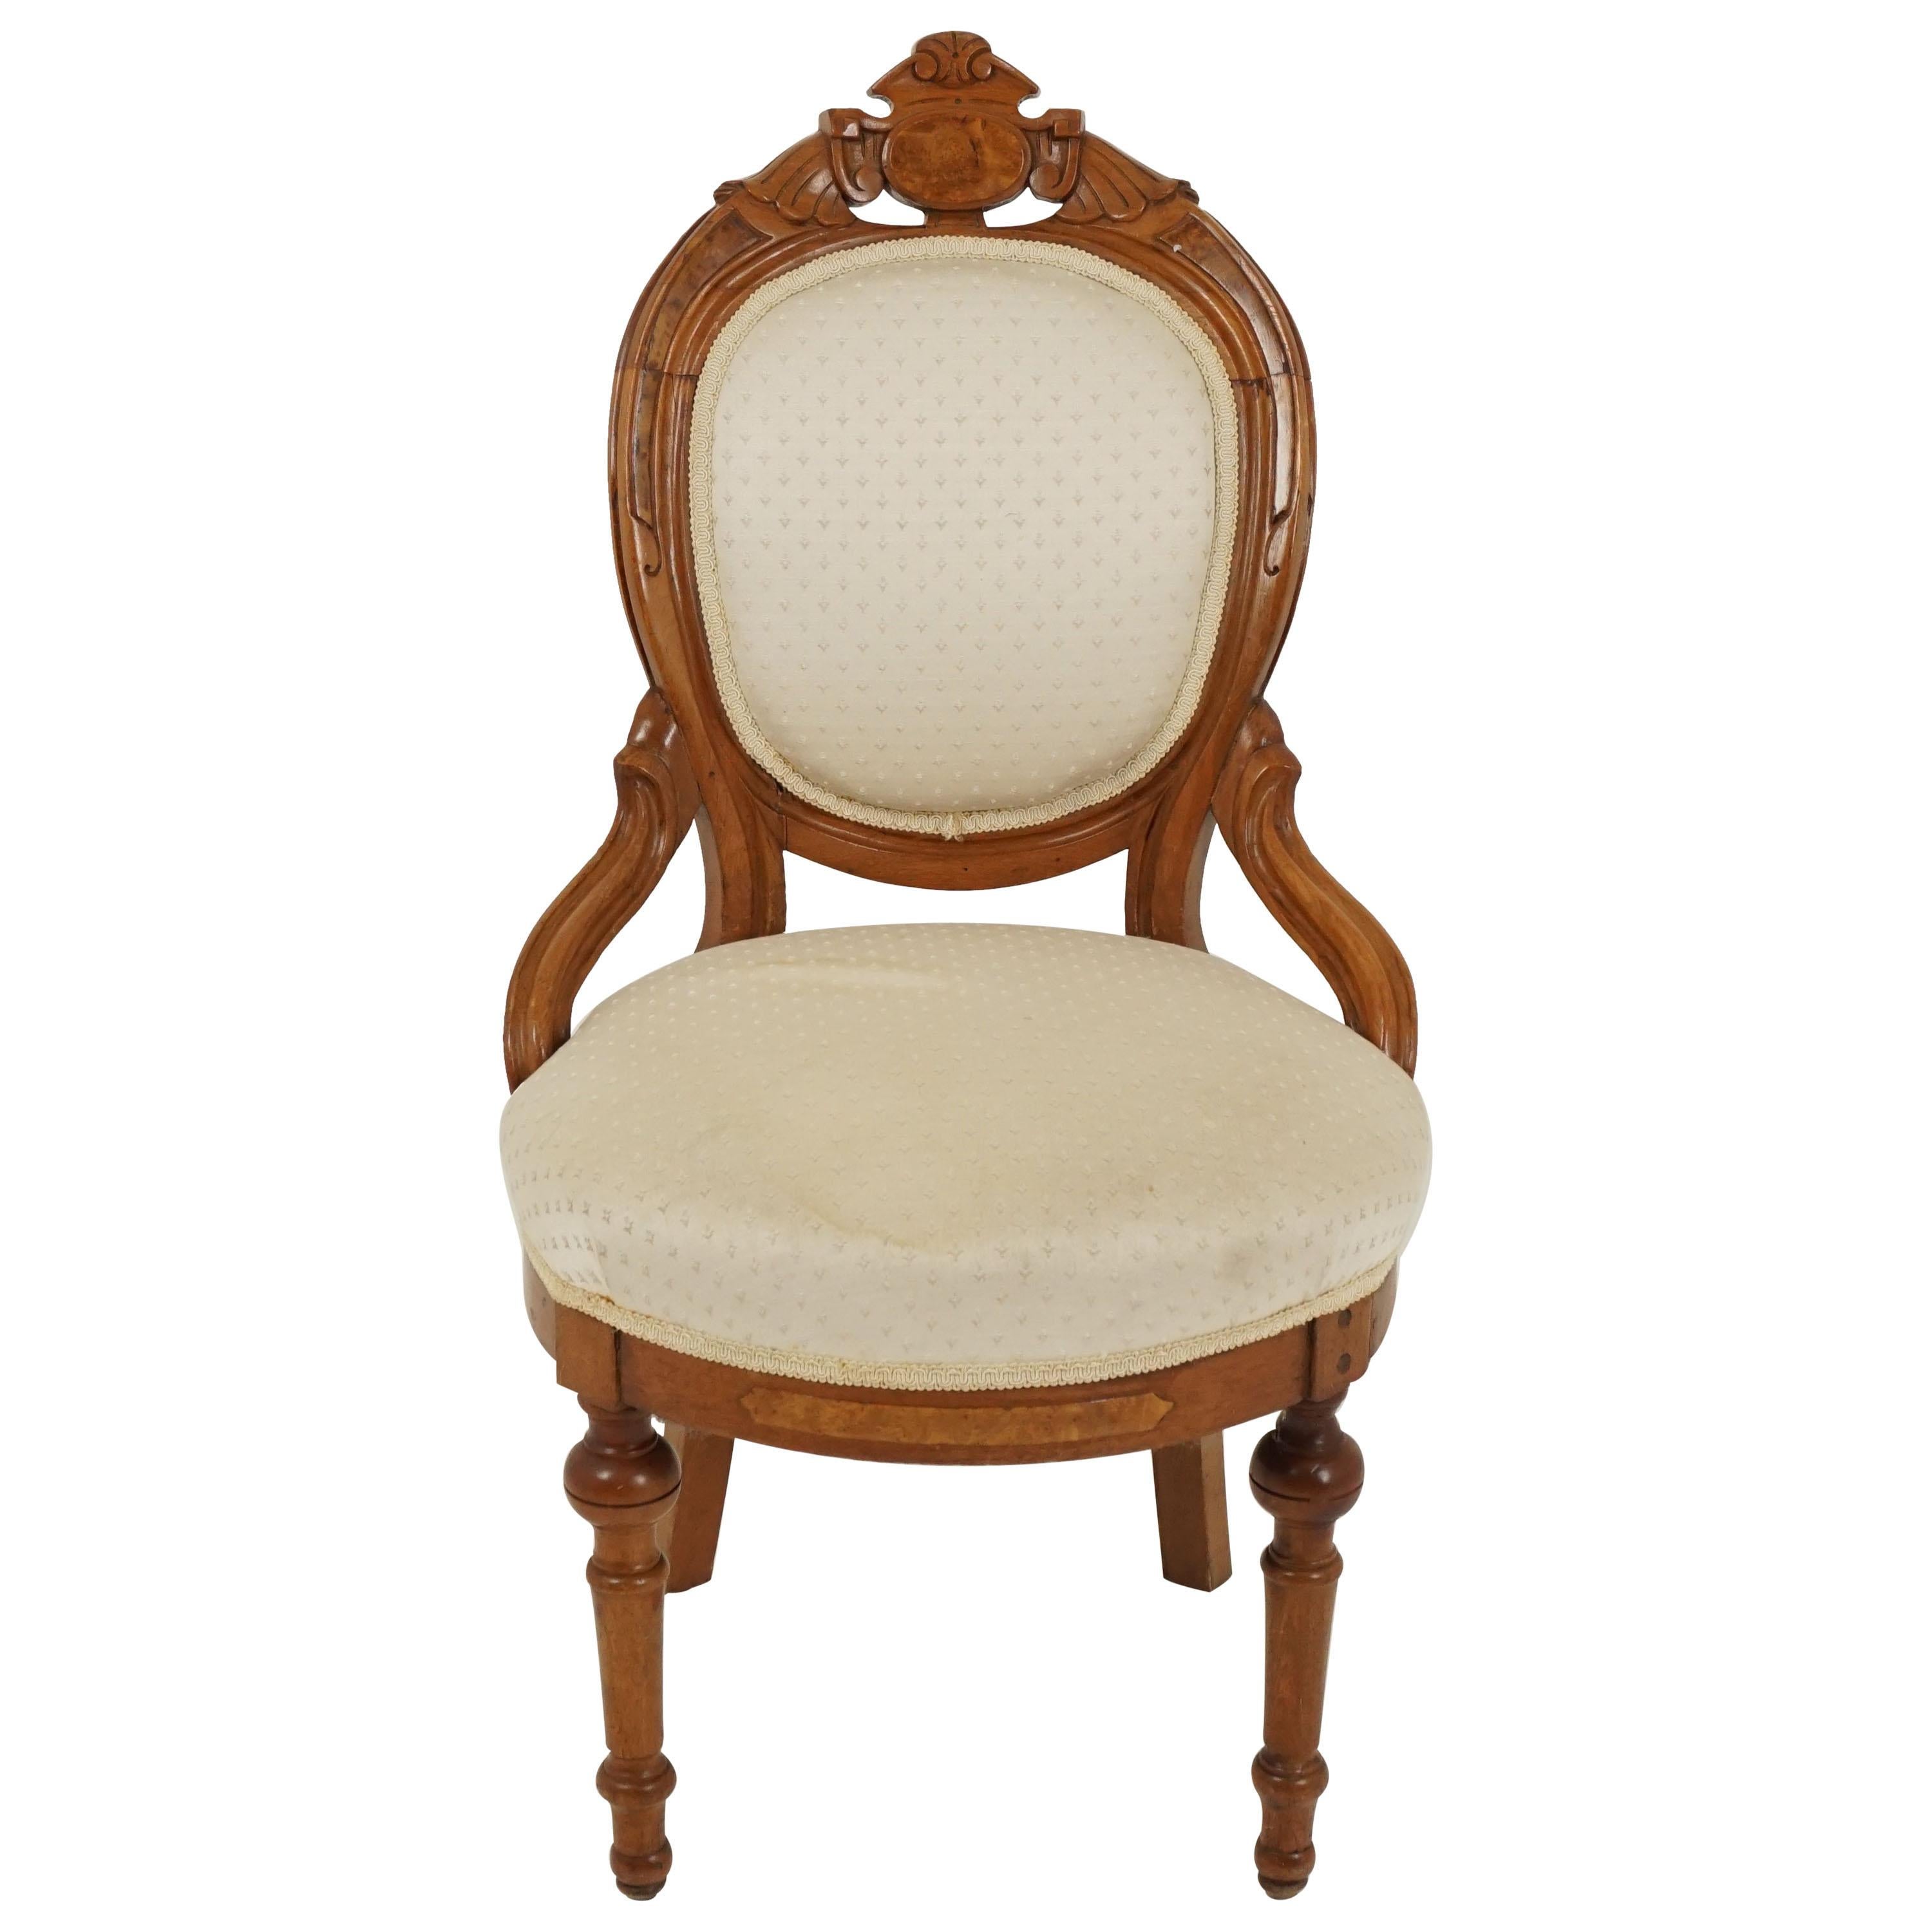 Antique Eastlake Chair, Walnut, Upholstered Parlour Chair, America 1890, B2709